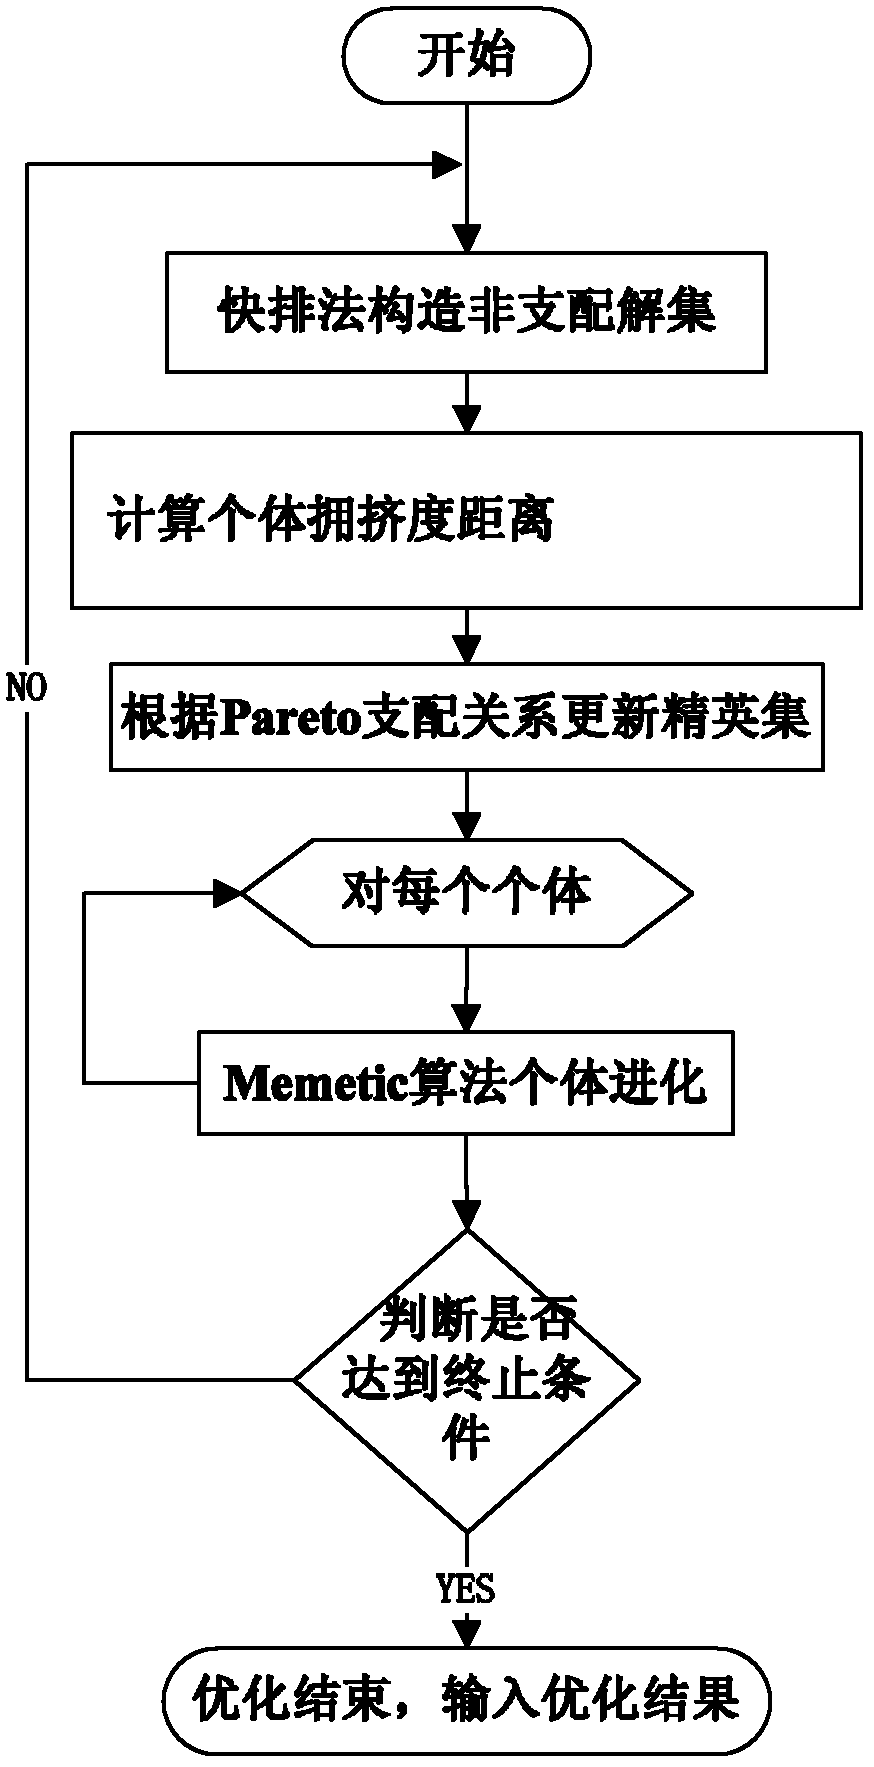 Multi-target reactive power optimization method for electric system